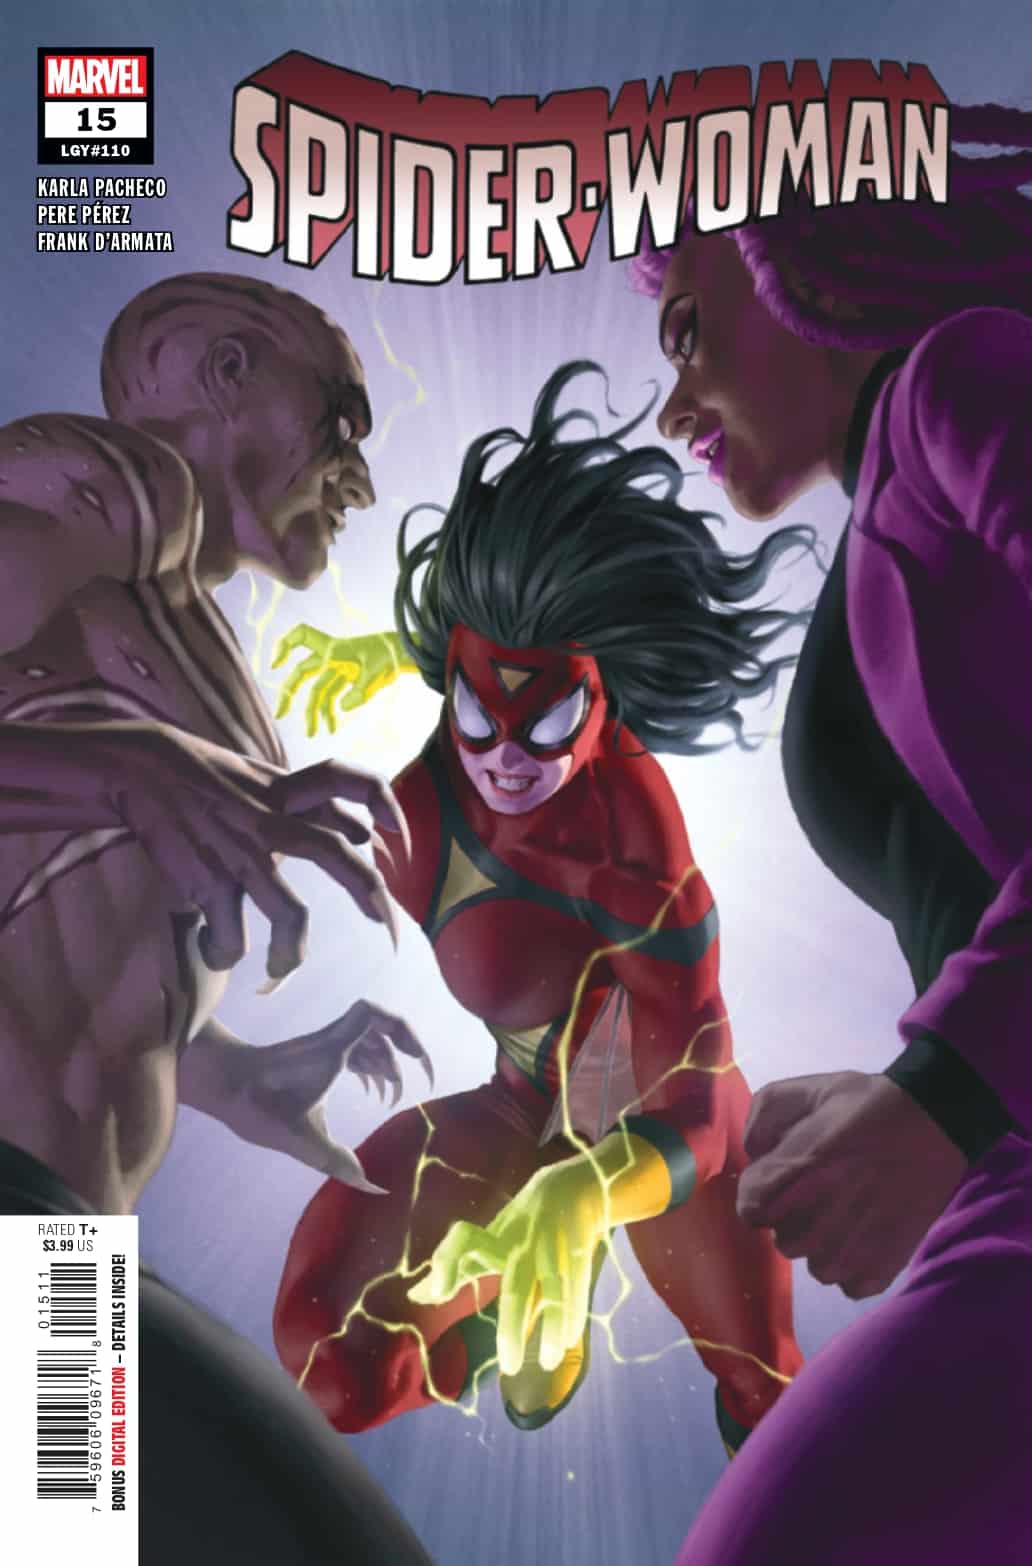 SNEAK PEEK: Preview of MARVEL's SPIDER-WOMAN #15 (On Sale 9/15 ...